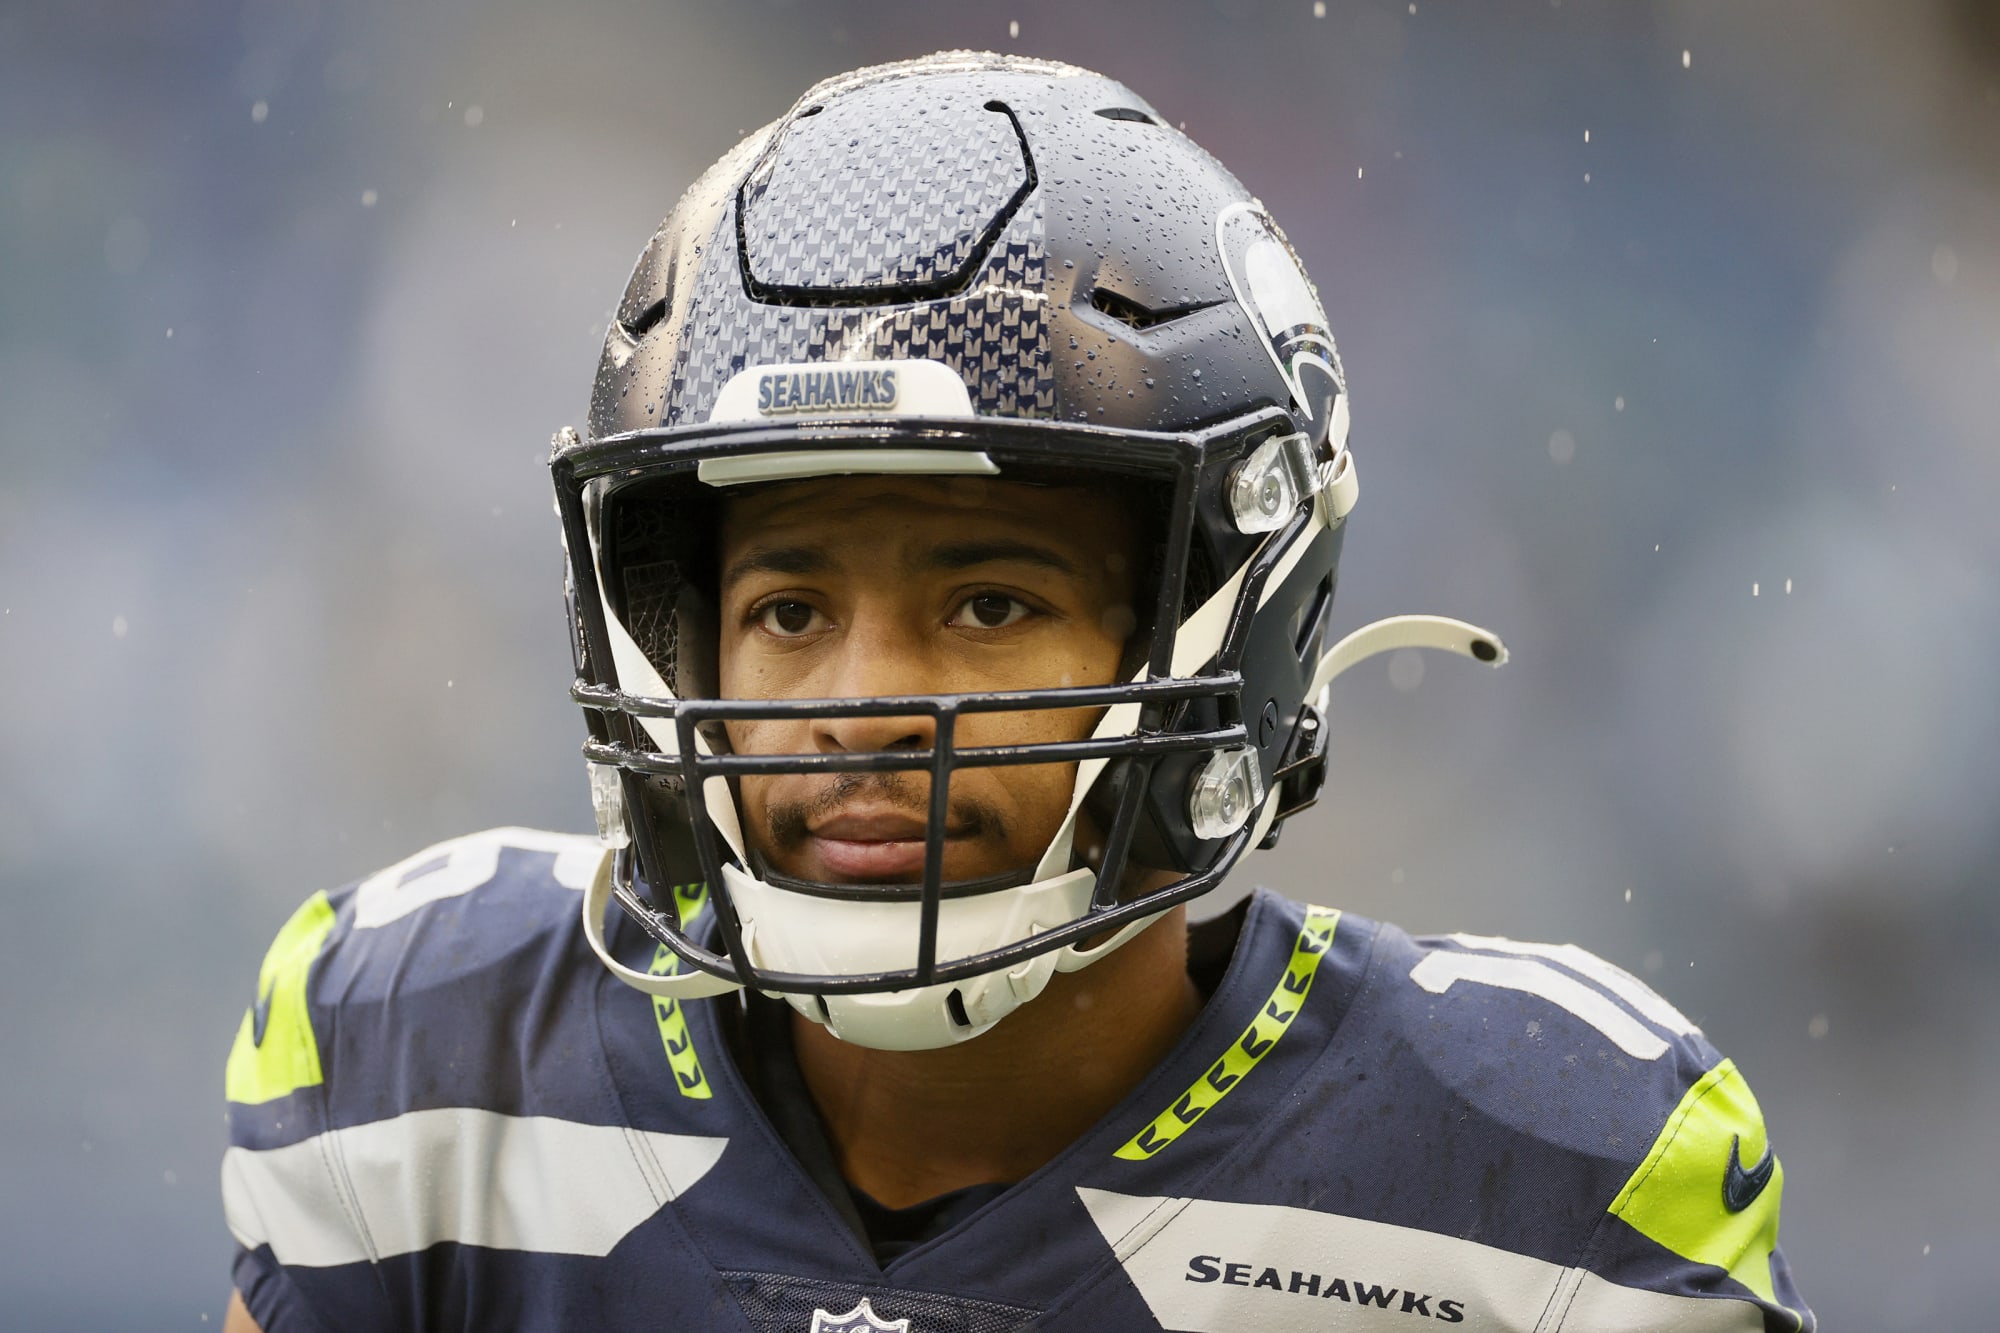 Tyler Lockett opens up about playing through mental health struggles